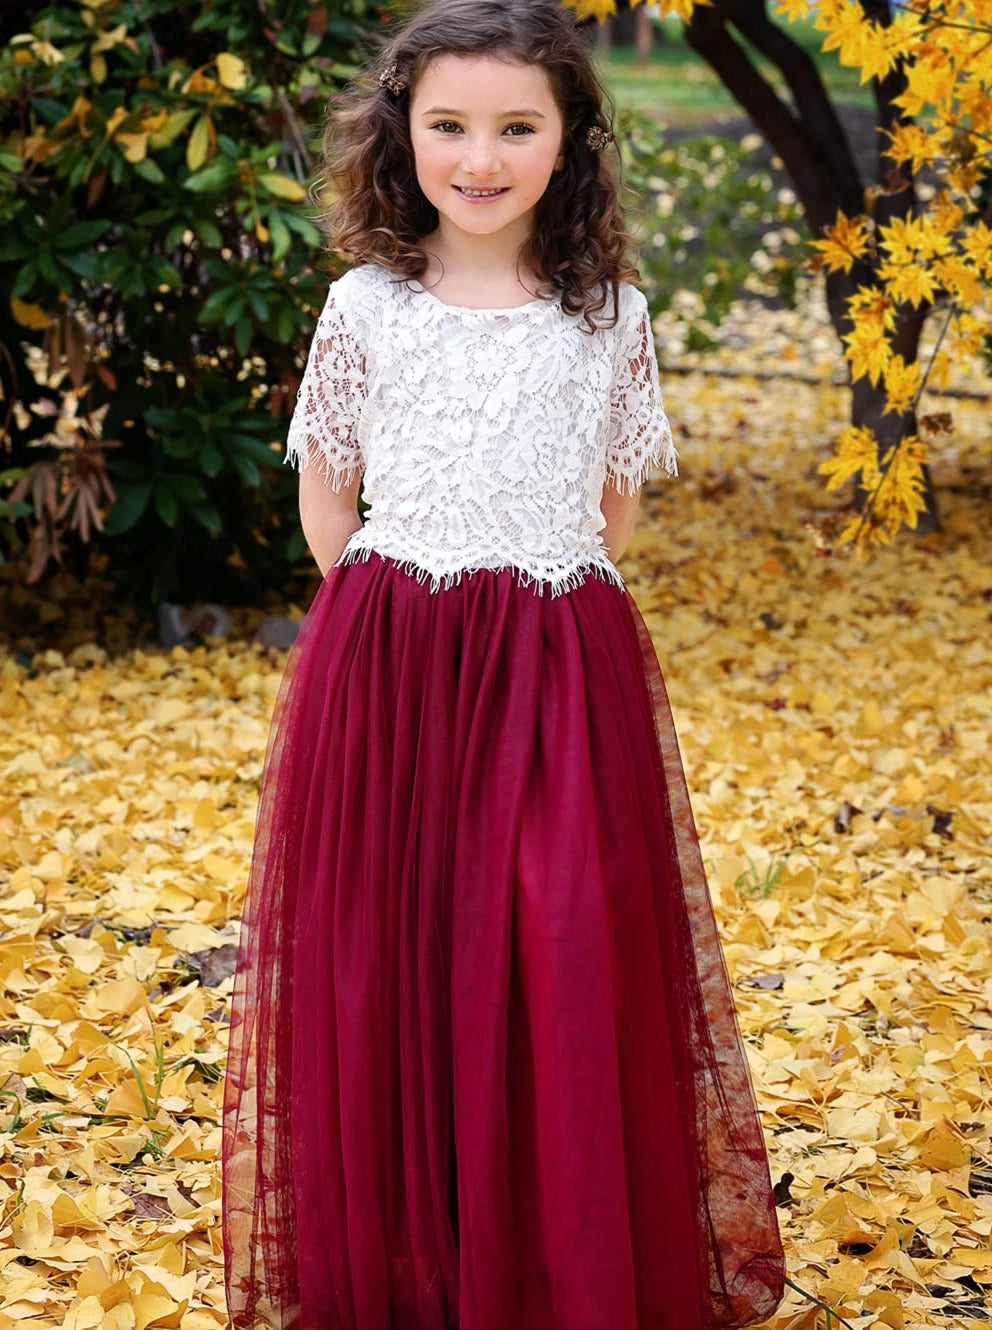 Scalloped Lace Girl Dress Set in Burgundy – 2BUNNIES